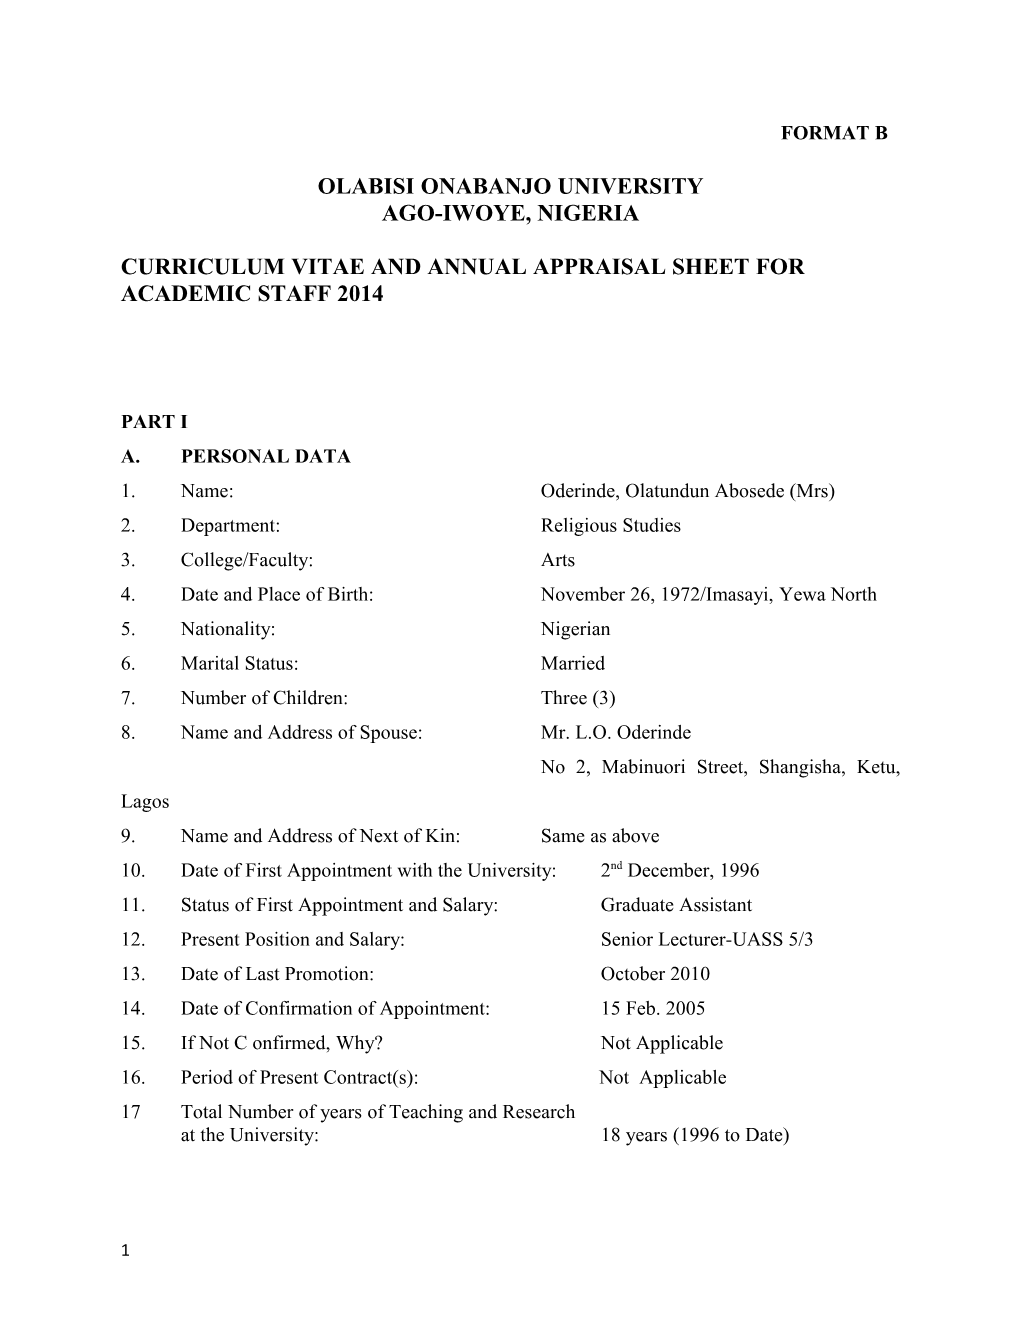 Curriculum Vitae and Annual Appraisal Sheet for Academic Staff 2014